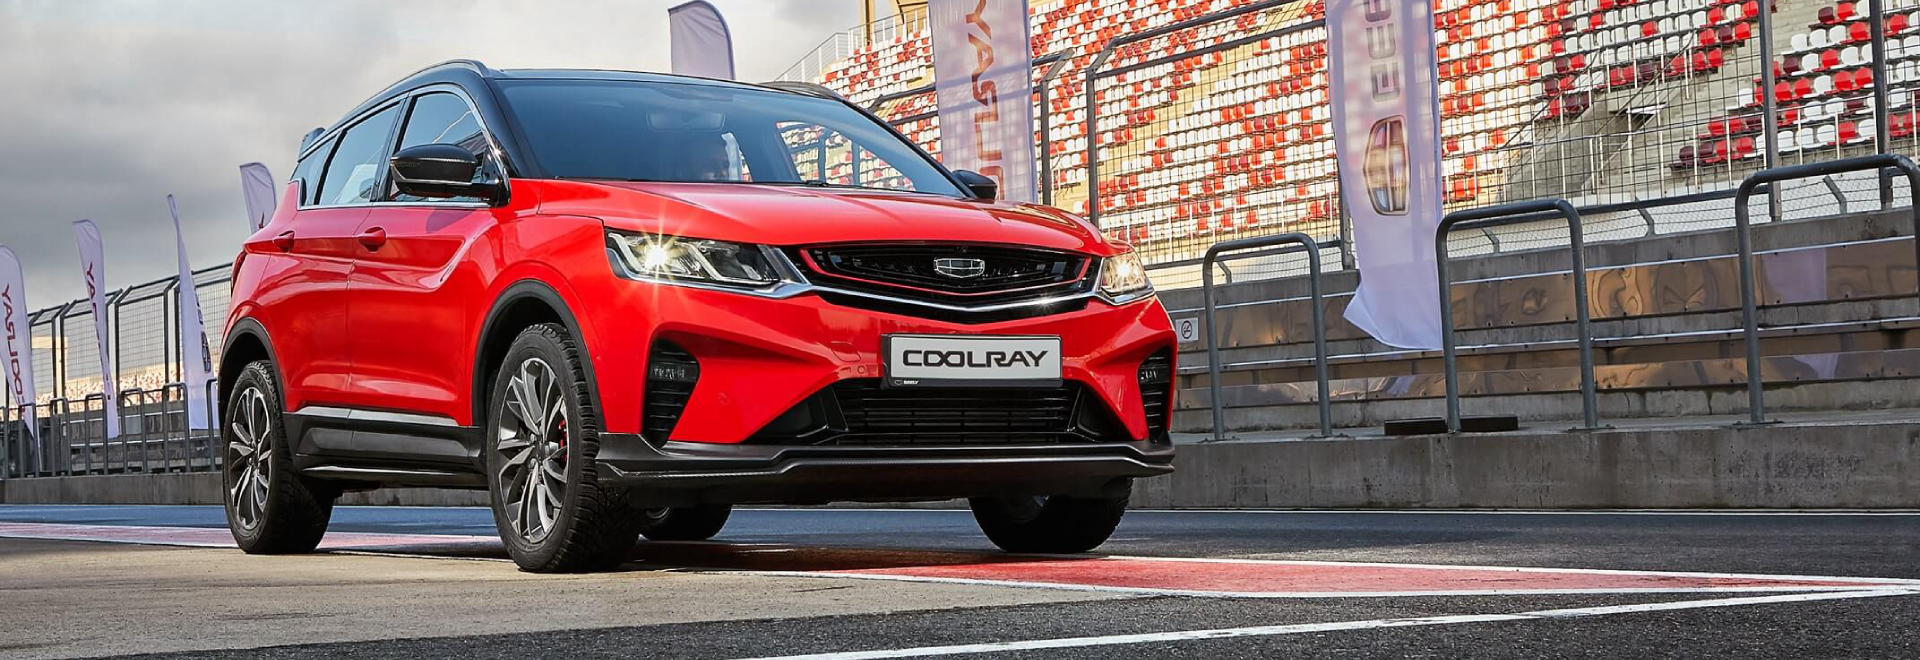 Geely coolray 2018